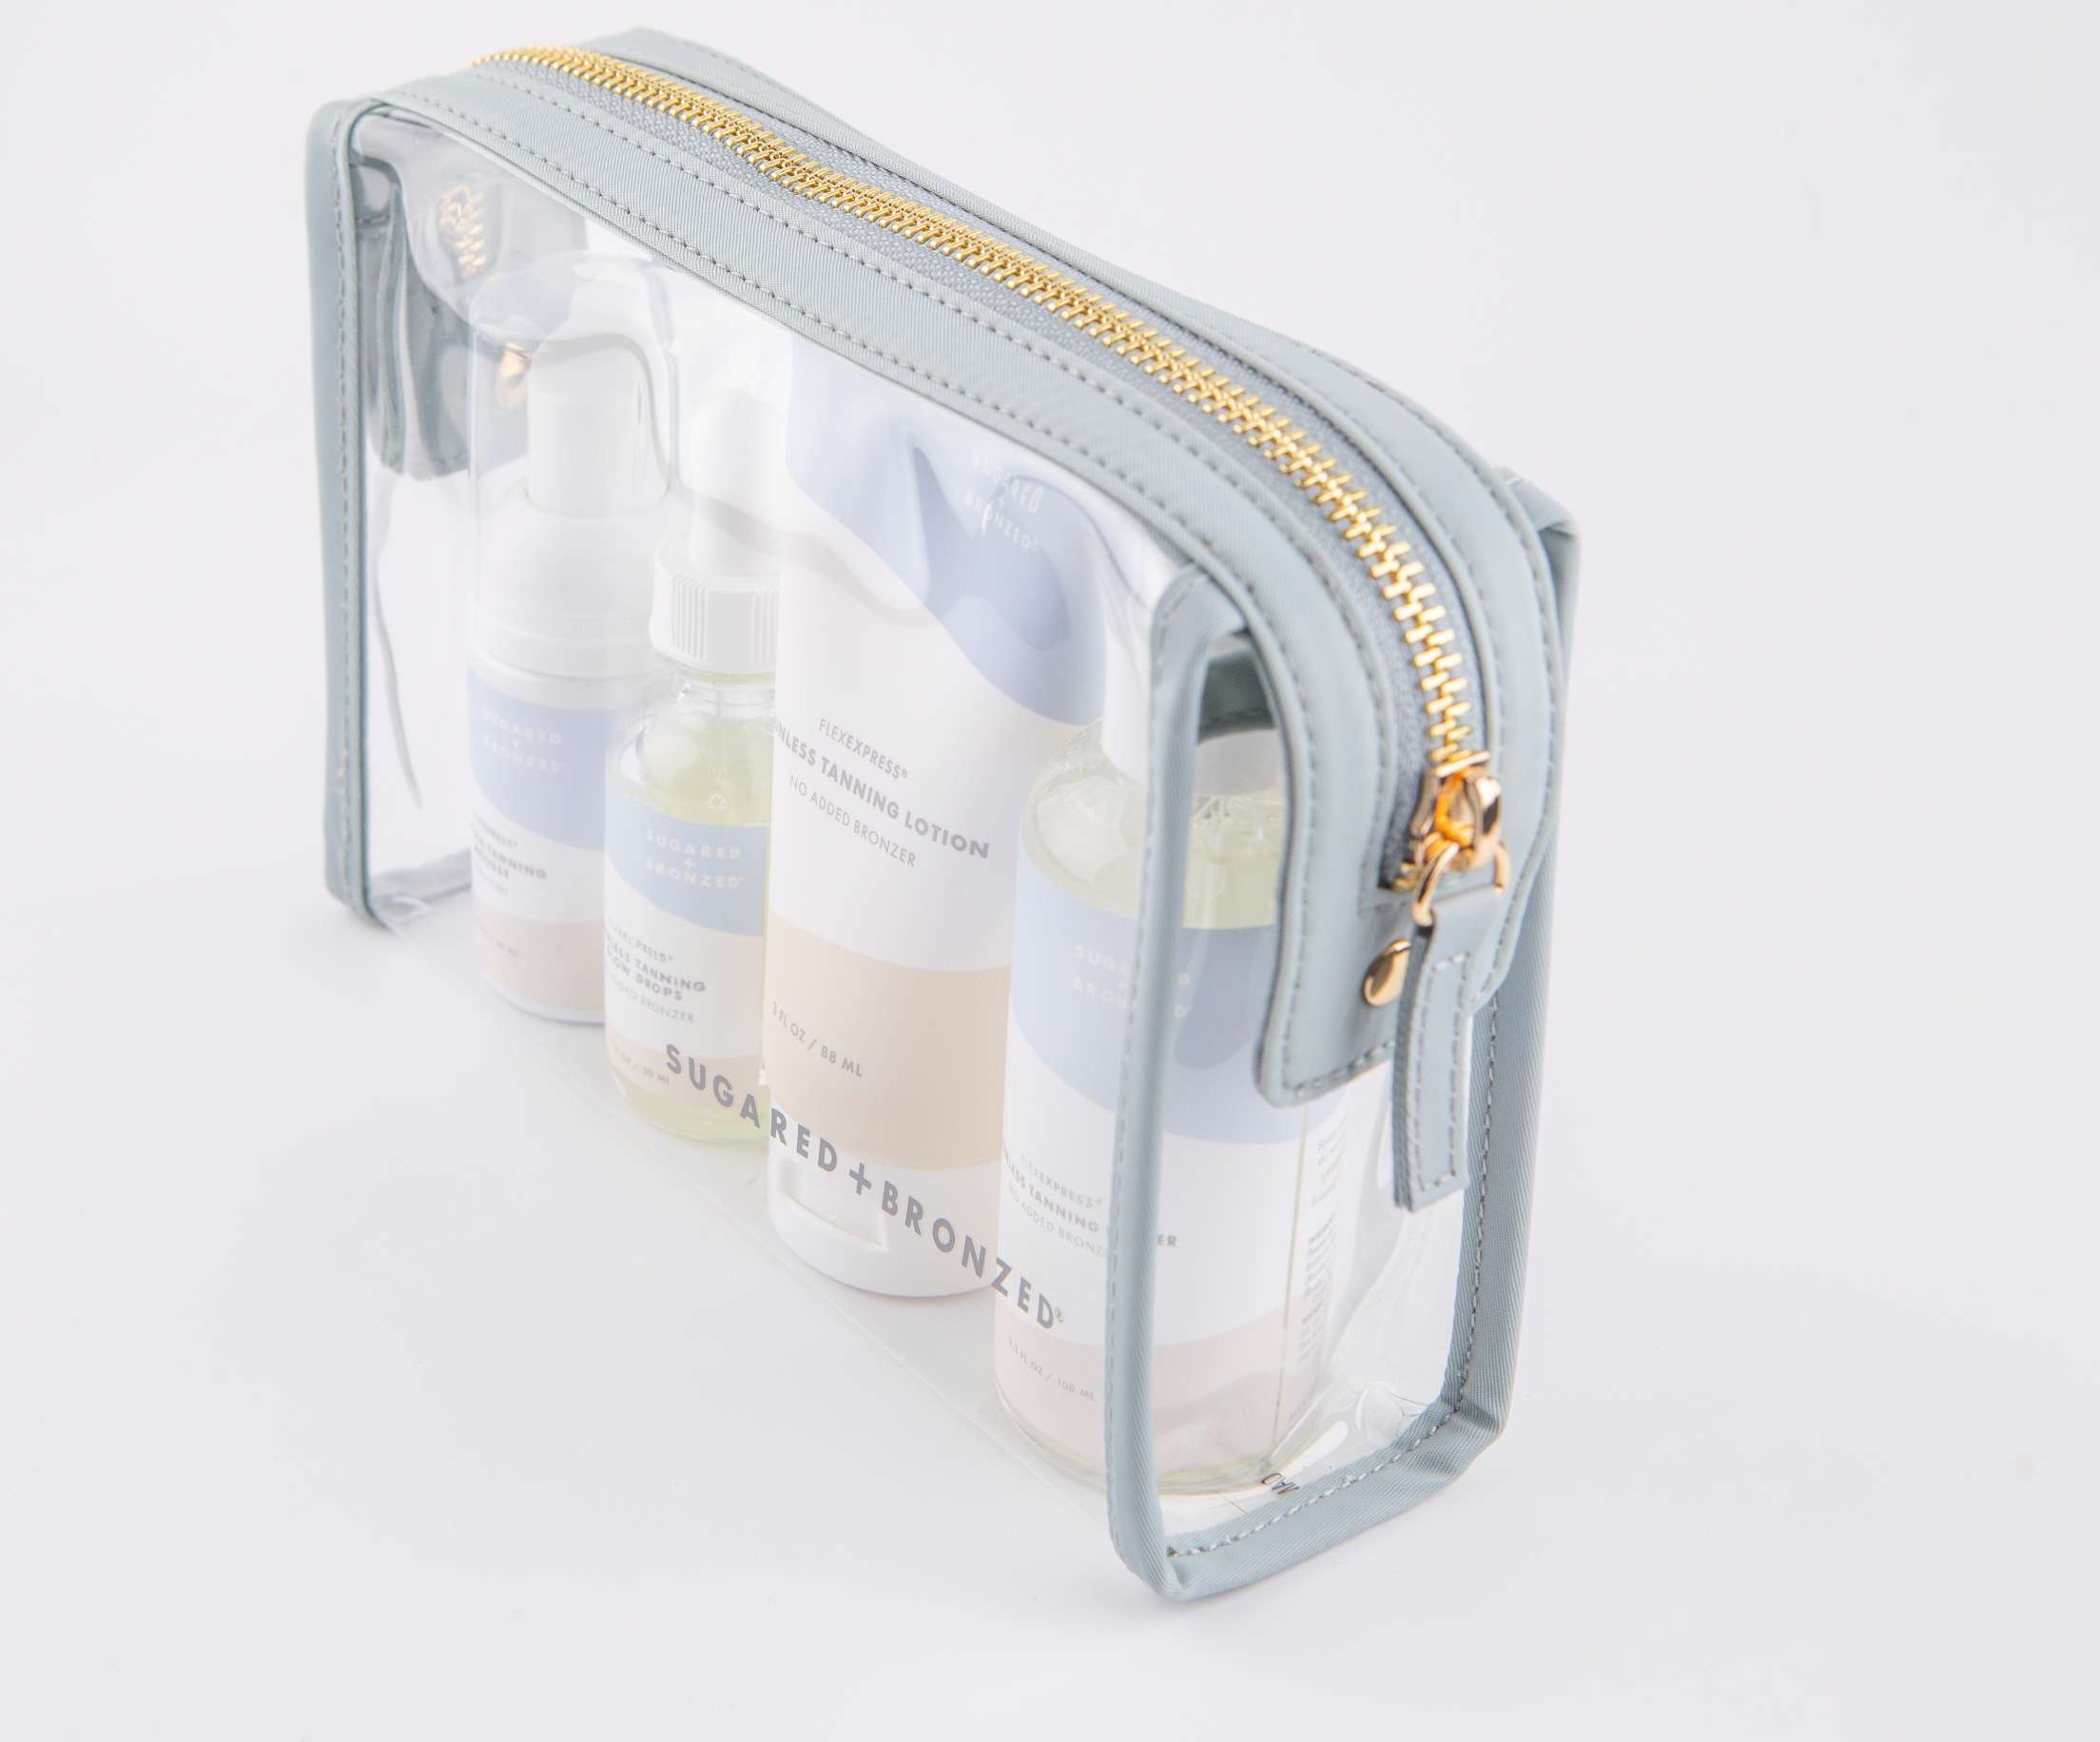 See-through bag holding bottles of Sugared and Bronzed tanning products.